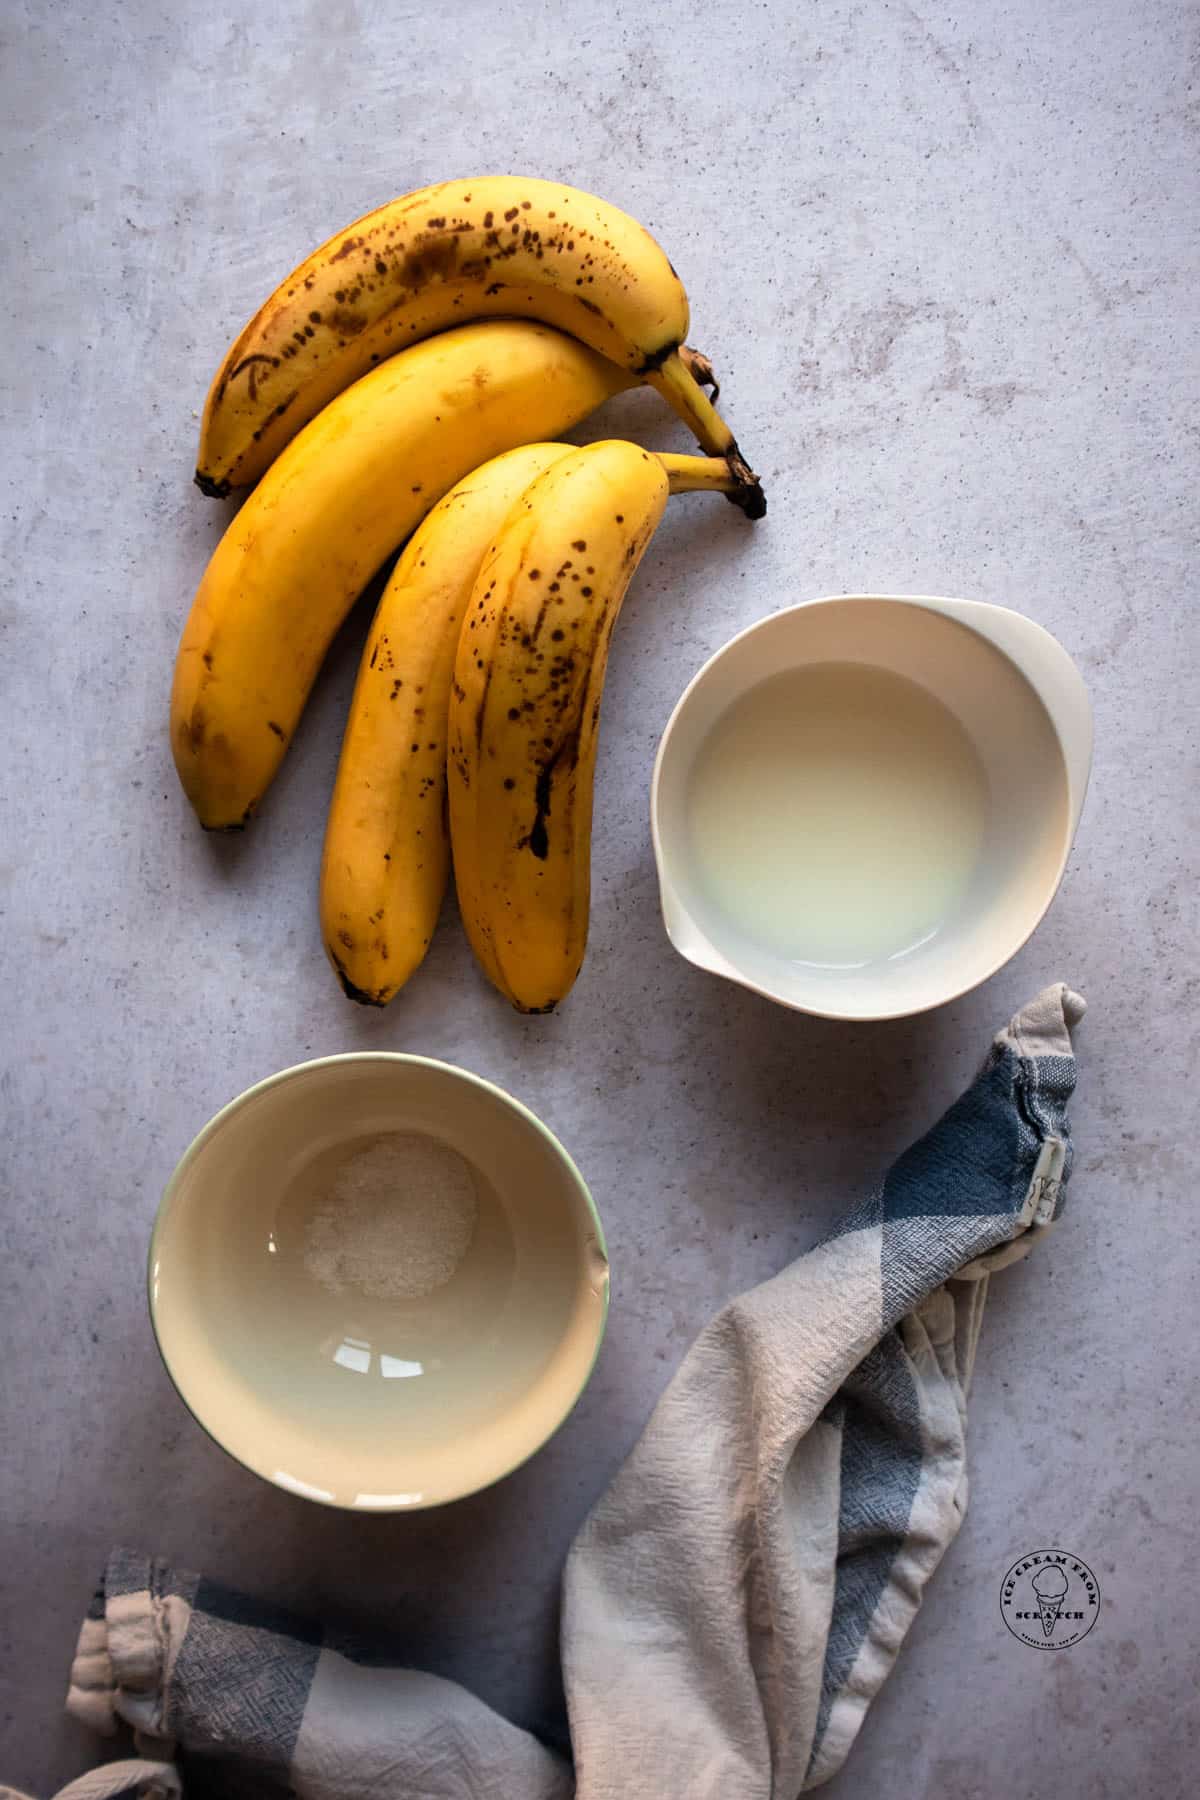 4 ripe bananas, a small bowl of milk, and a small bowl with a pinch of salt, on a concrete counter. A blue plaid dish towel is there as well.